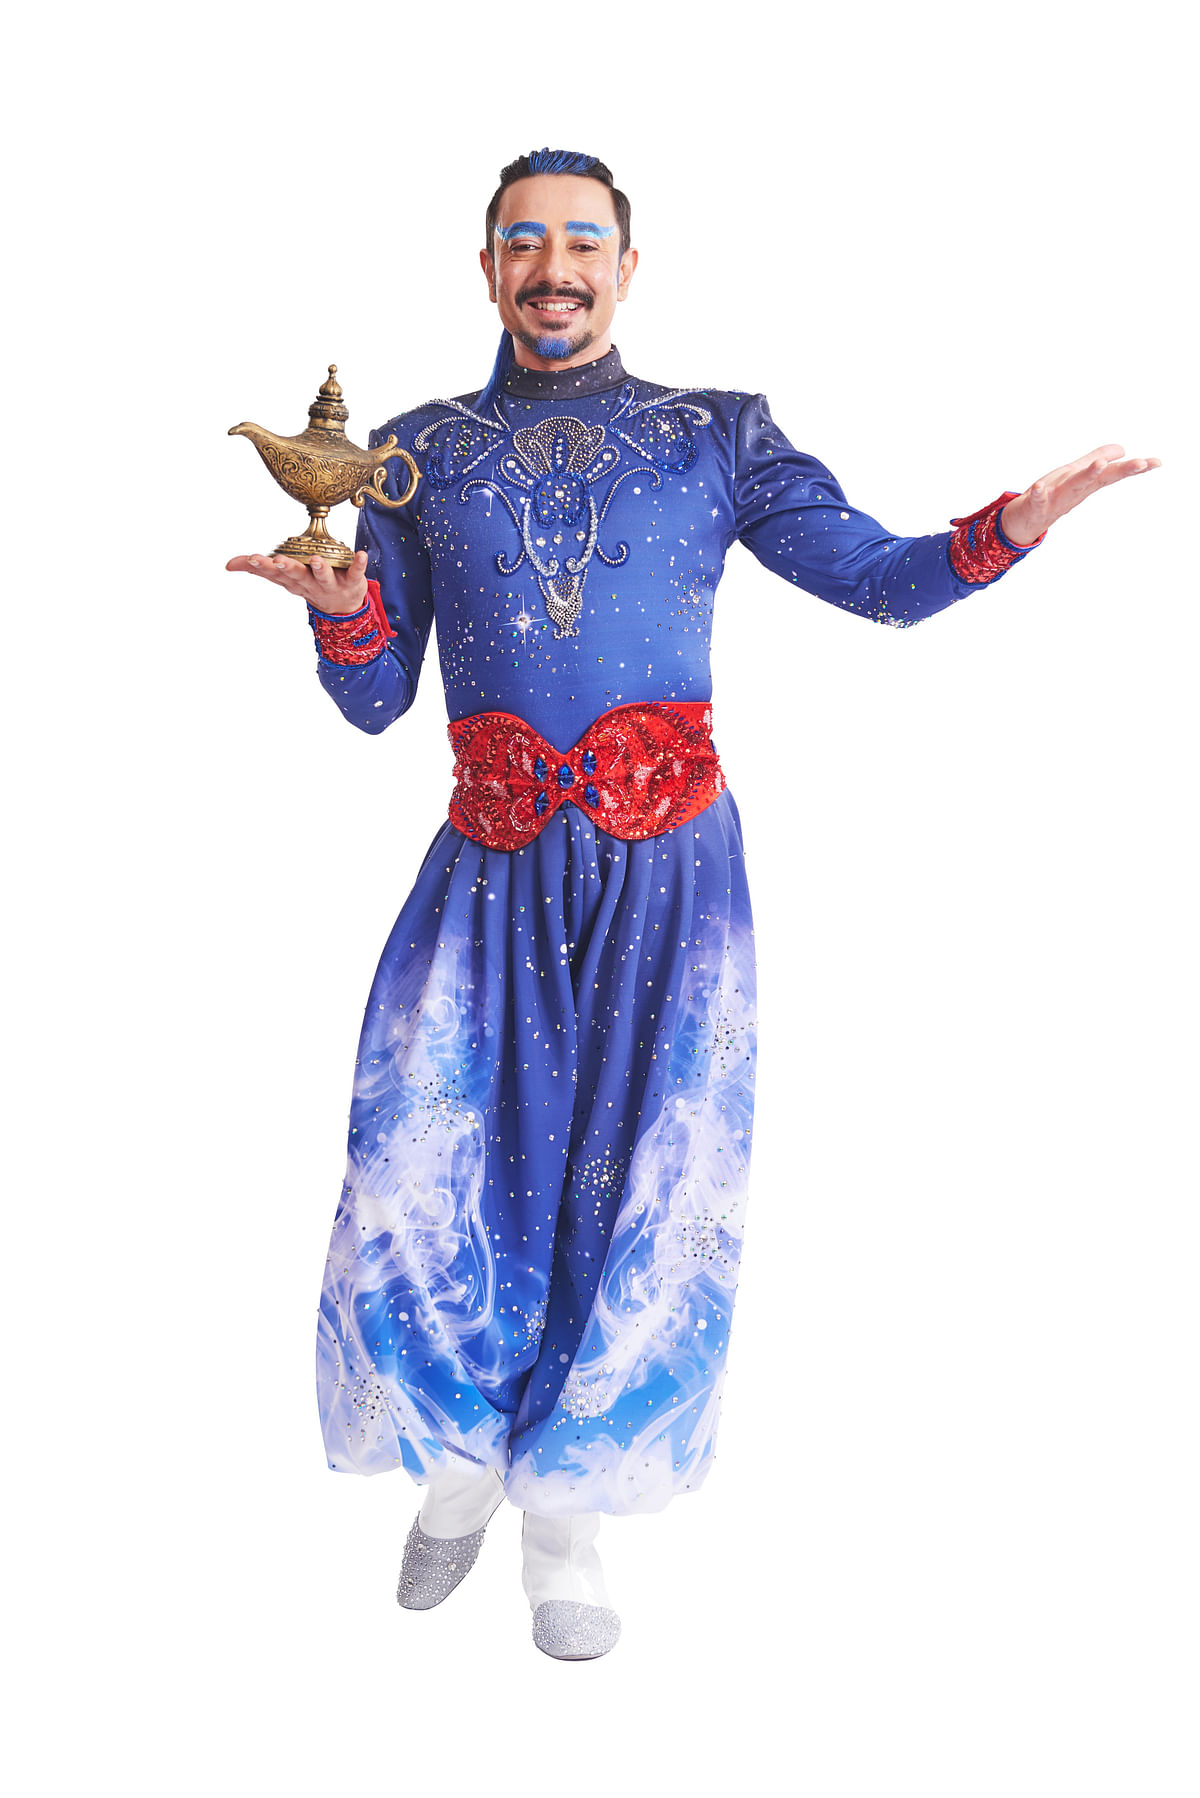 Disney’s Aladdin sets its feet firmly on the ground with a local cast.